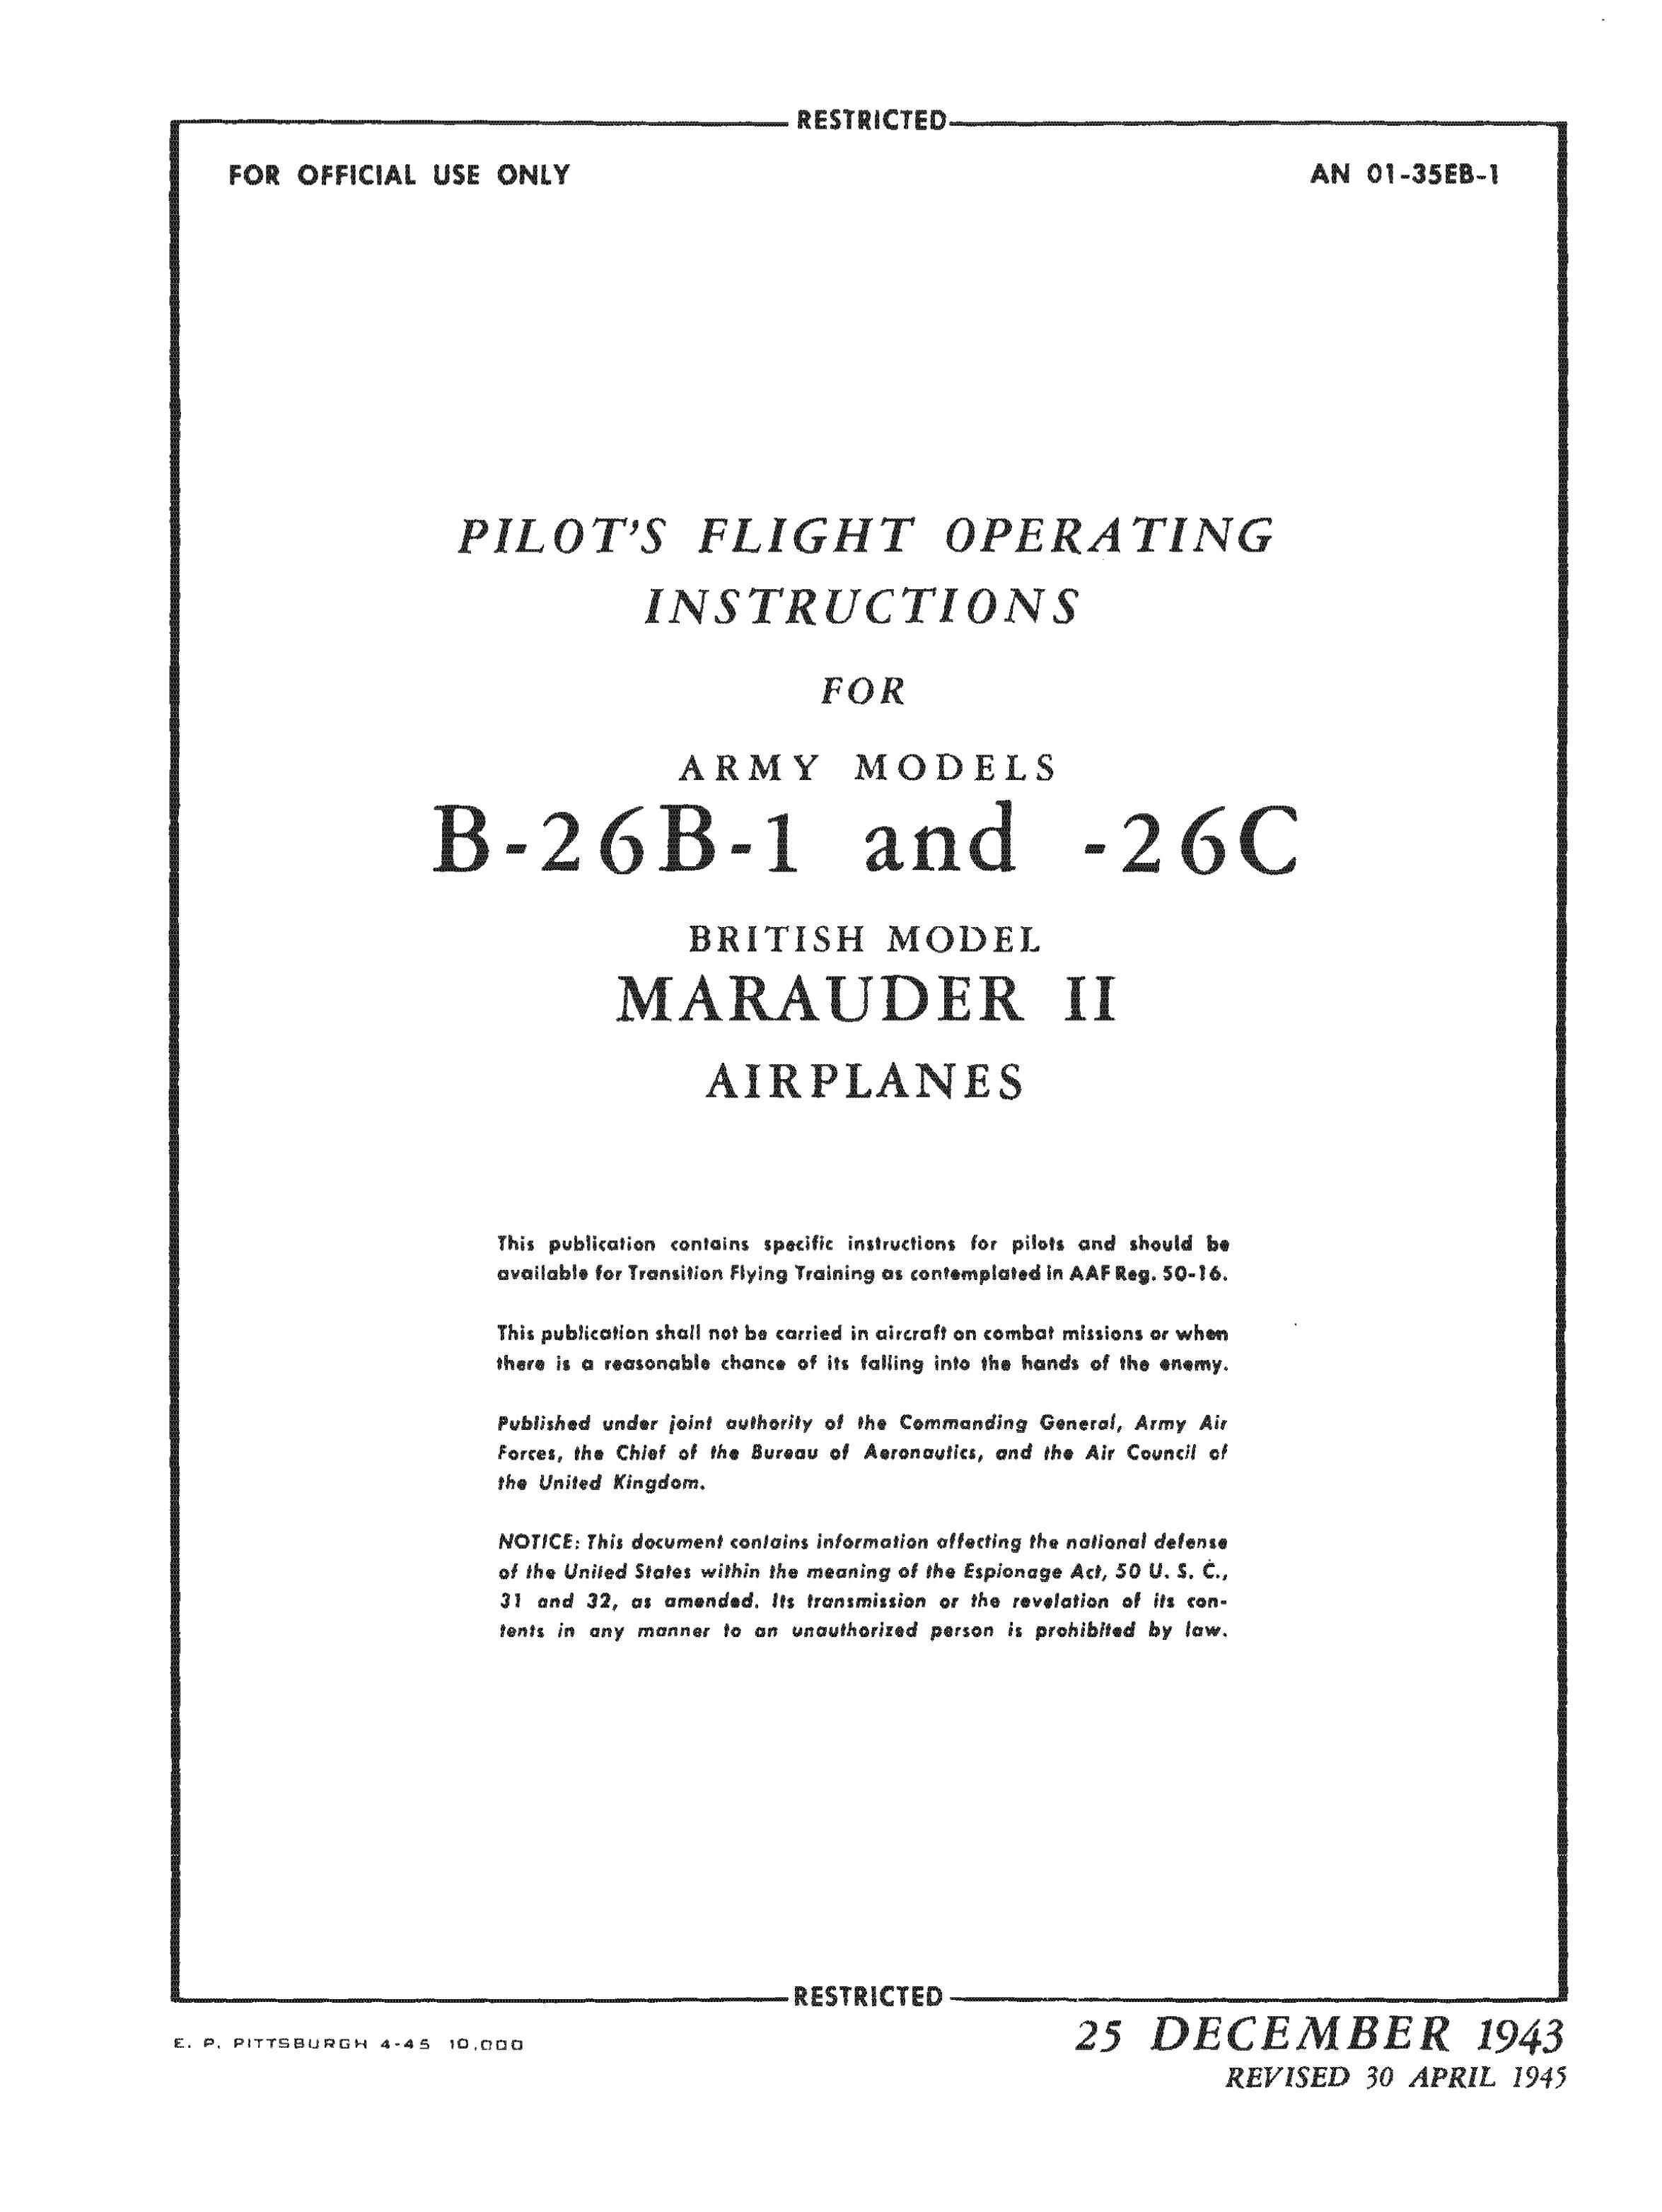 Sample page 1 from AirCorps Library document: Pilot's Flight Operating Instructions for B-26B-1 and -26C